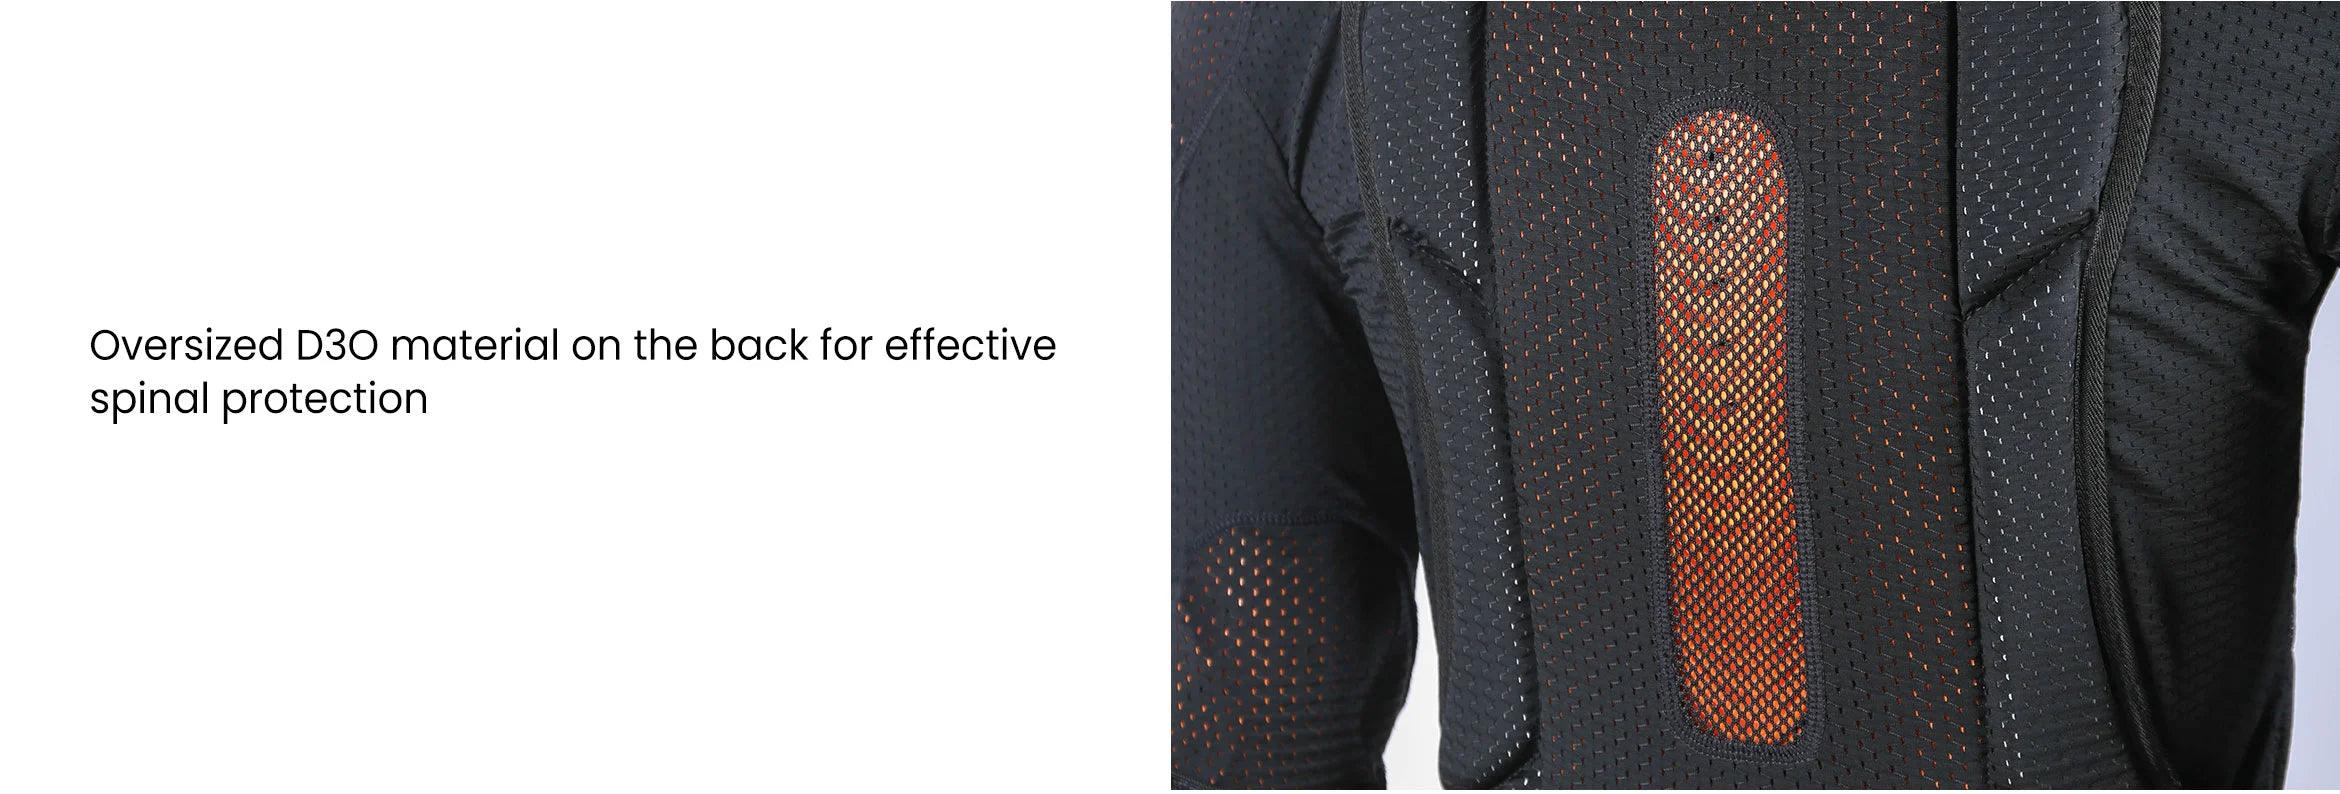 4. Doorek ski protector armor Oversized D3O material on the back for effective spinal protection-